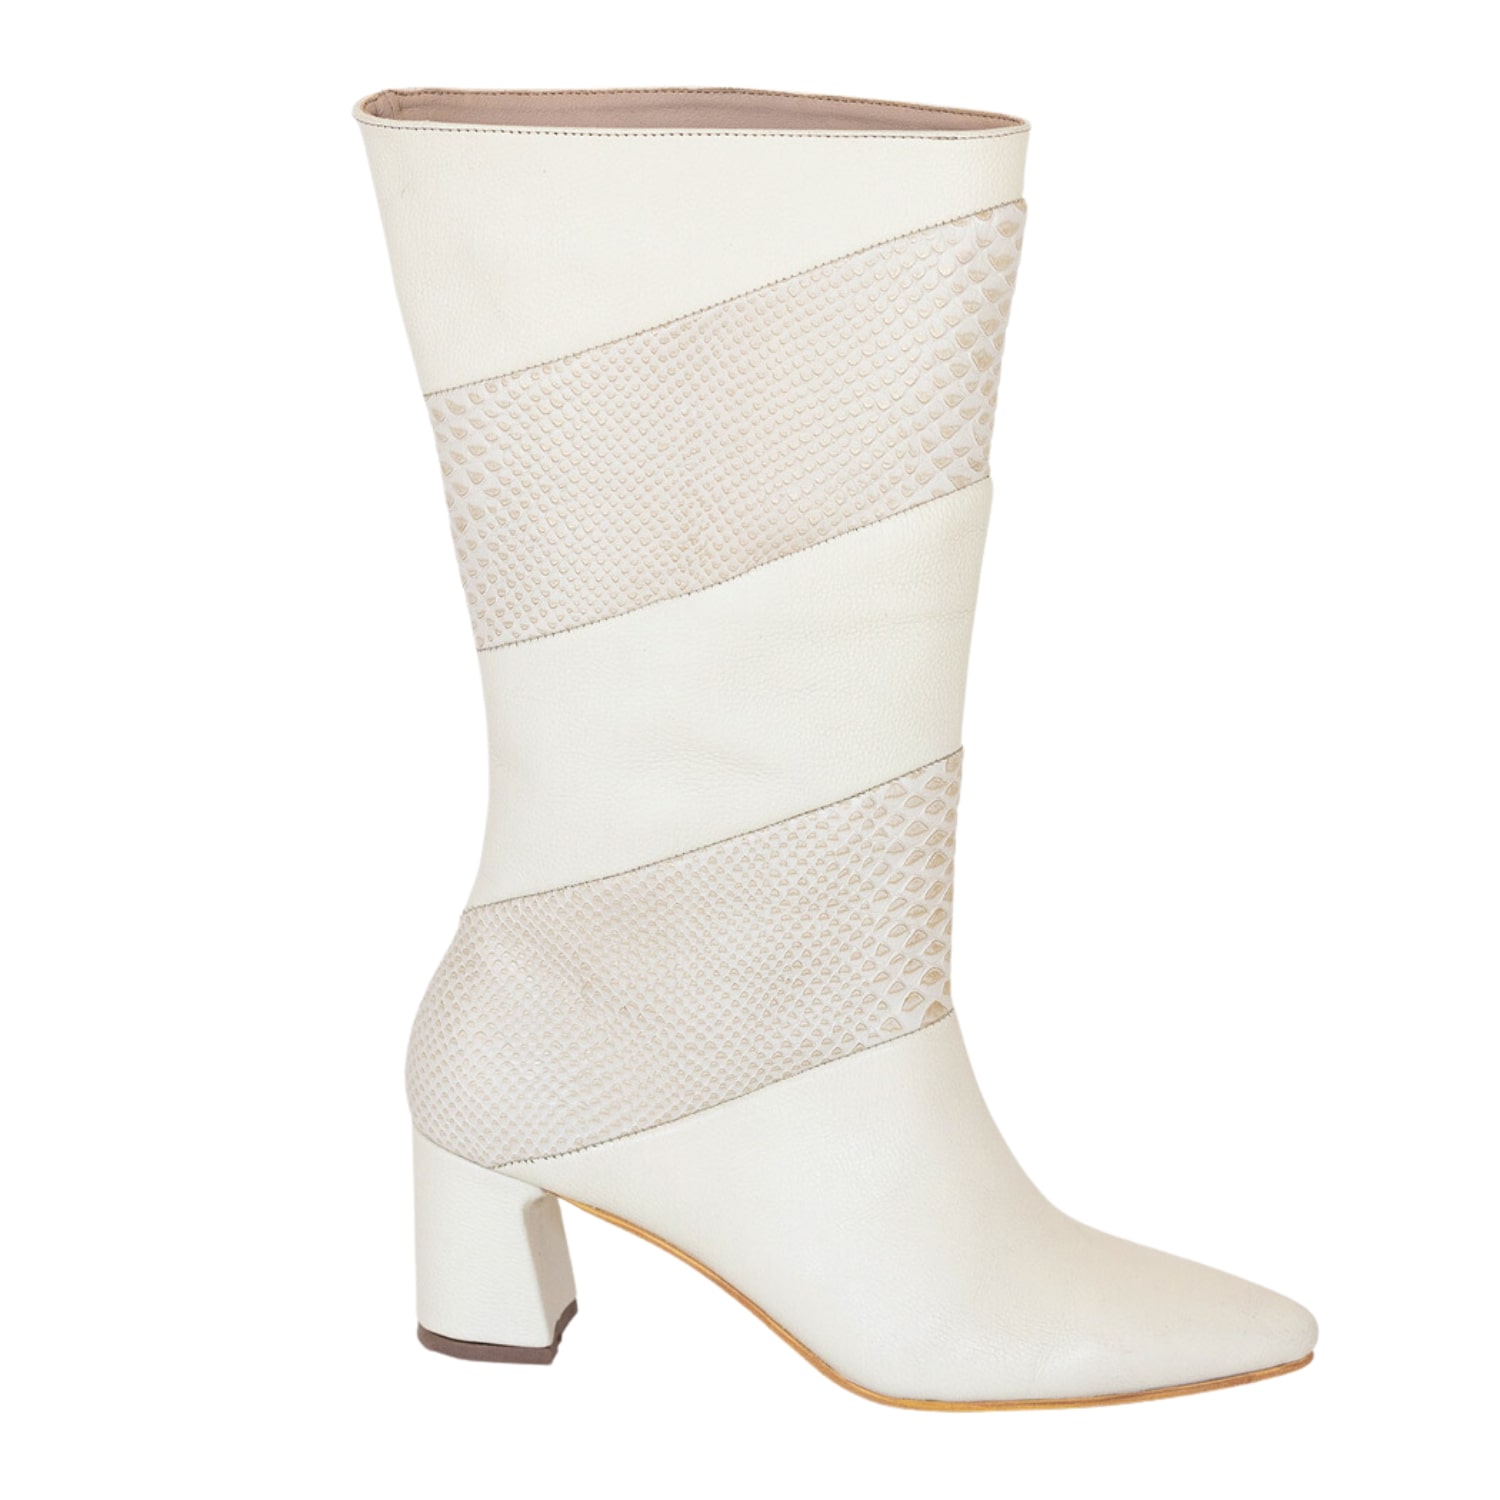 Women’s Neutrals Ela Boots In White & Ivory Croc Embossed Leather 7 Uk Stivali New York